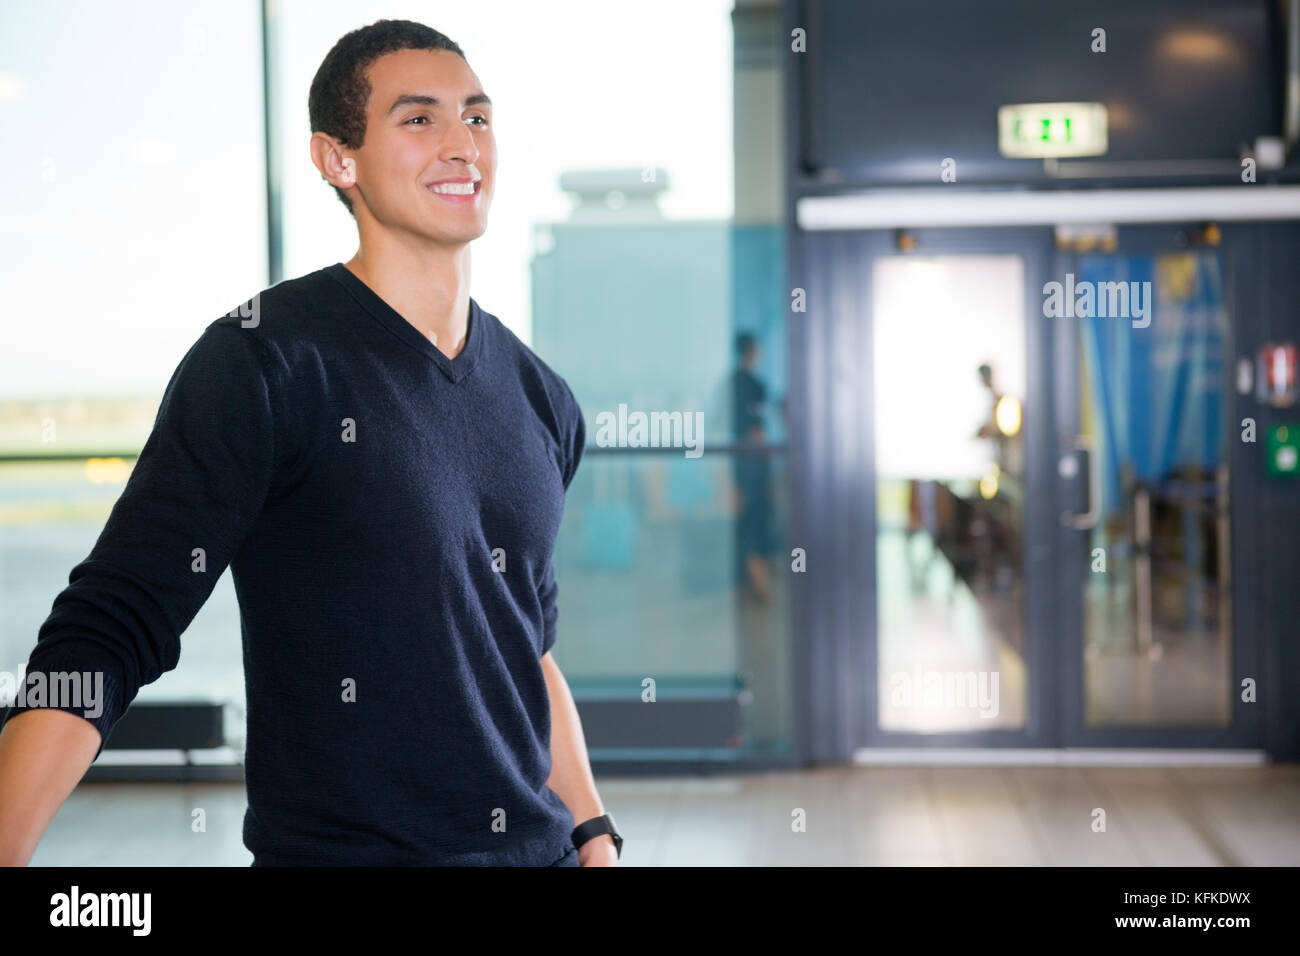 Smiling Male Passenger At Airport Terminal Stock Photo